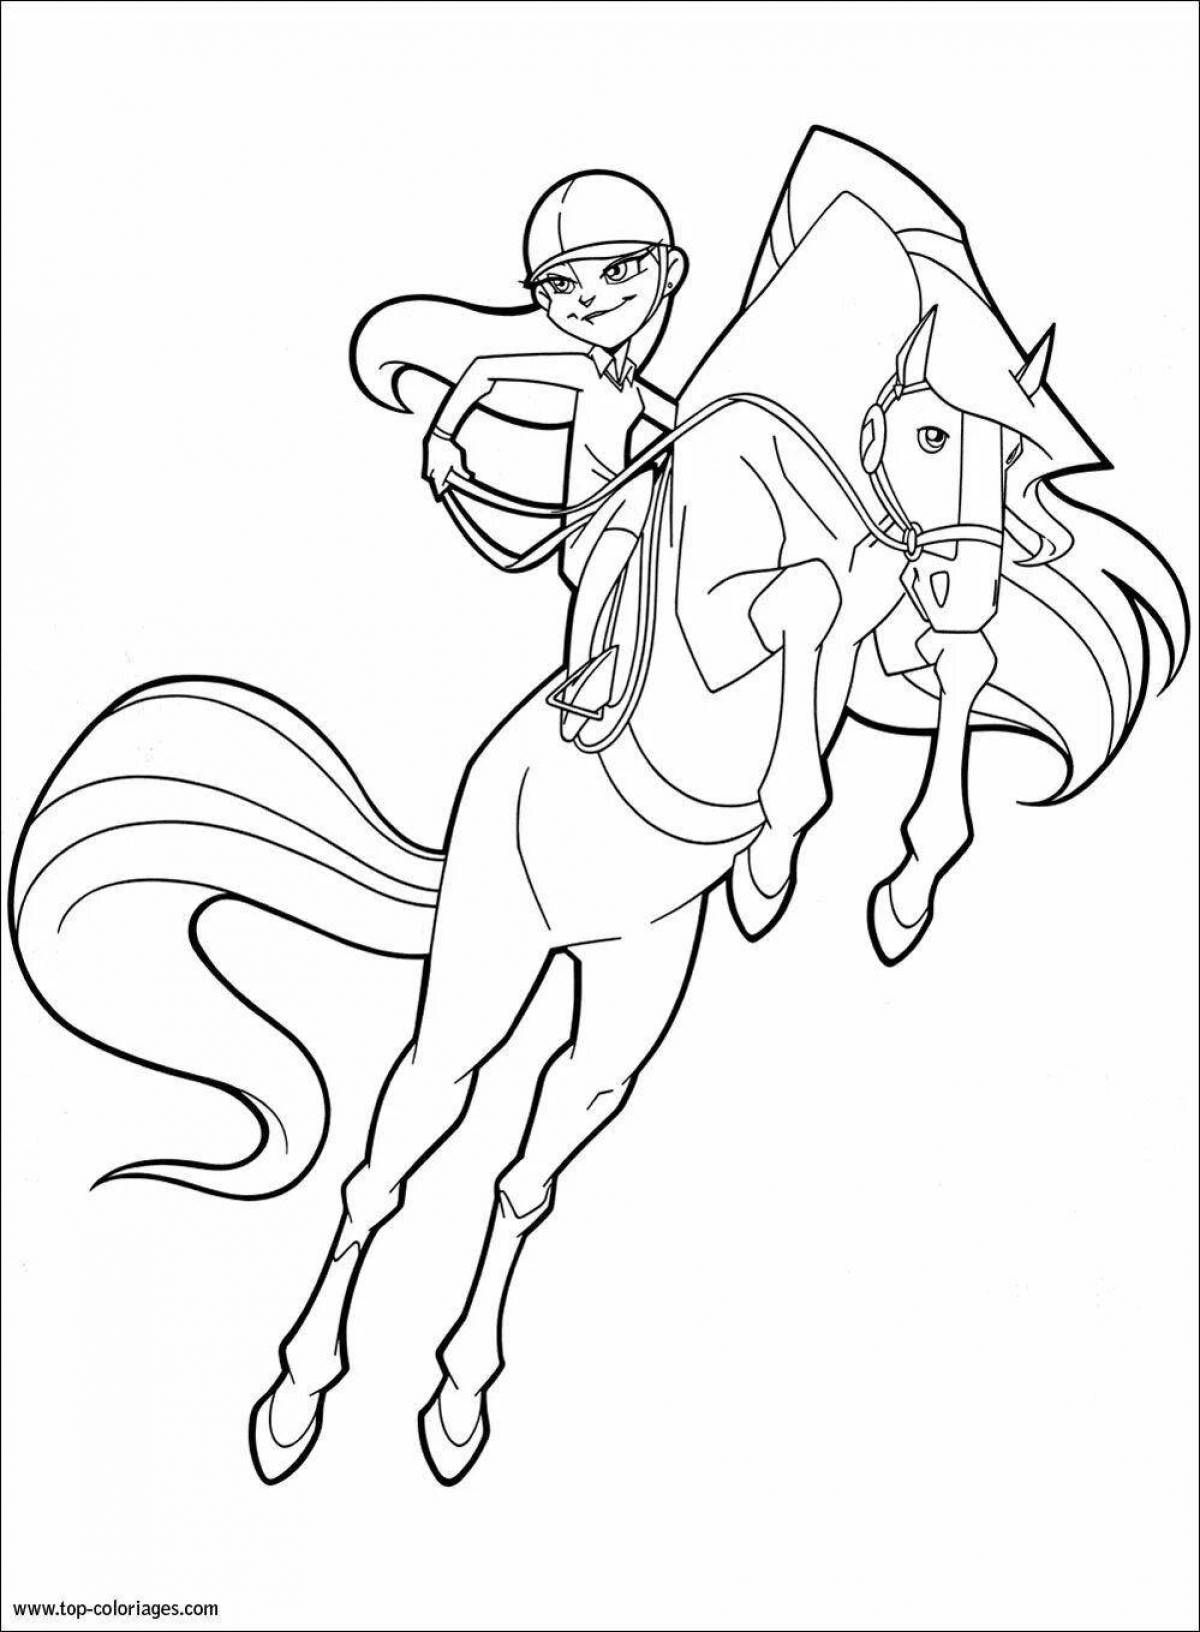 Coloring page delightful land of horses